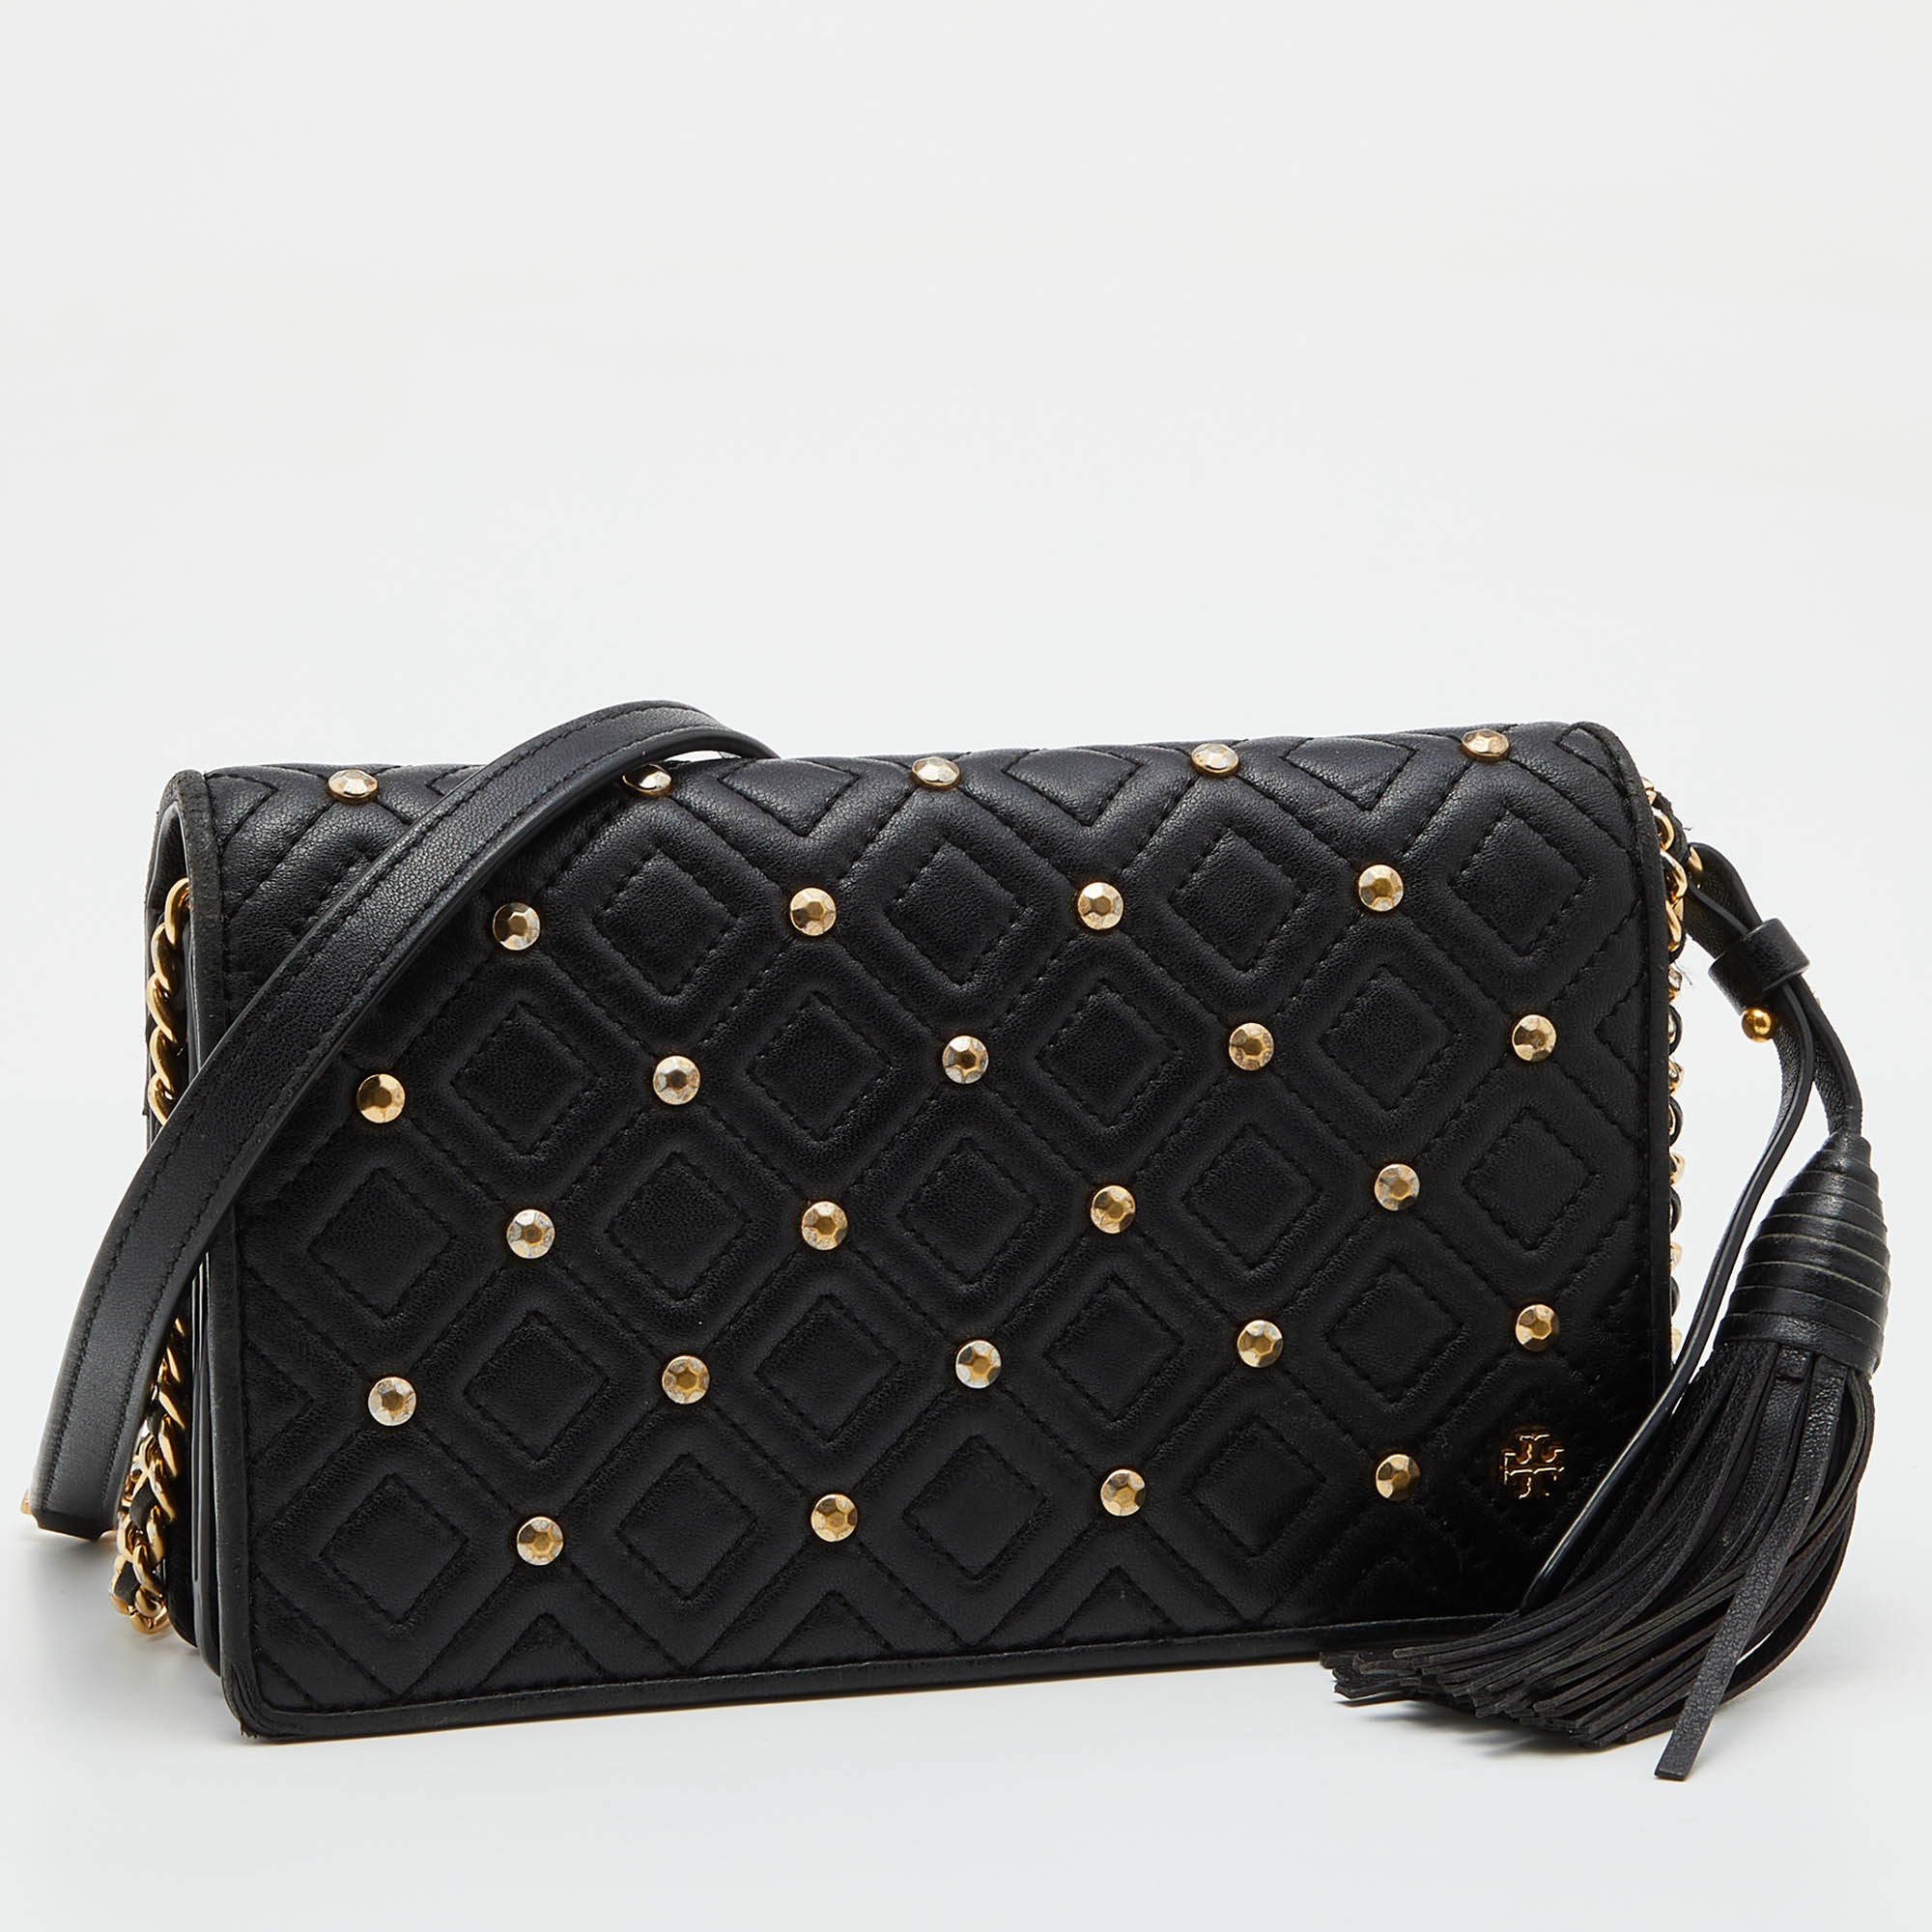 Tory Burch Black Quilted Leather Flap Chain Shoulder Bag Tory Burch | TLC